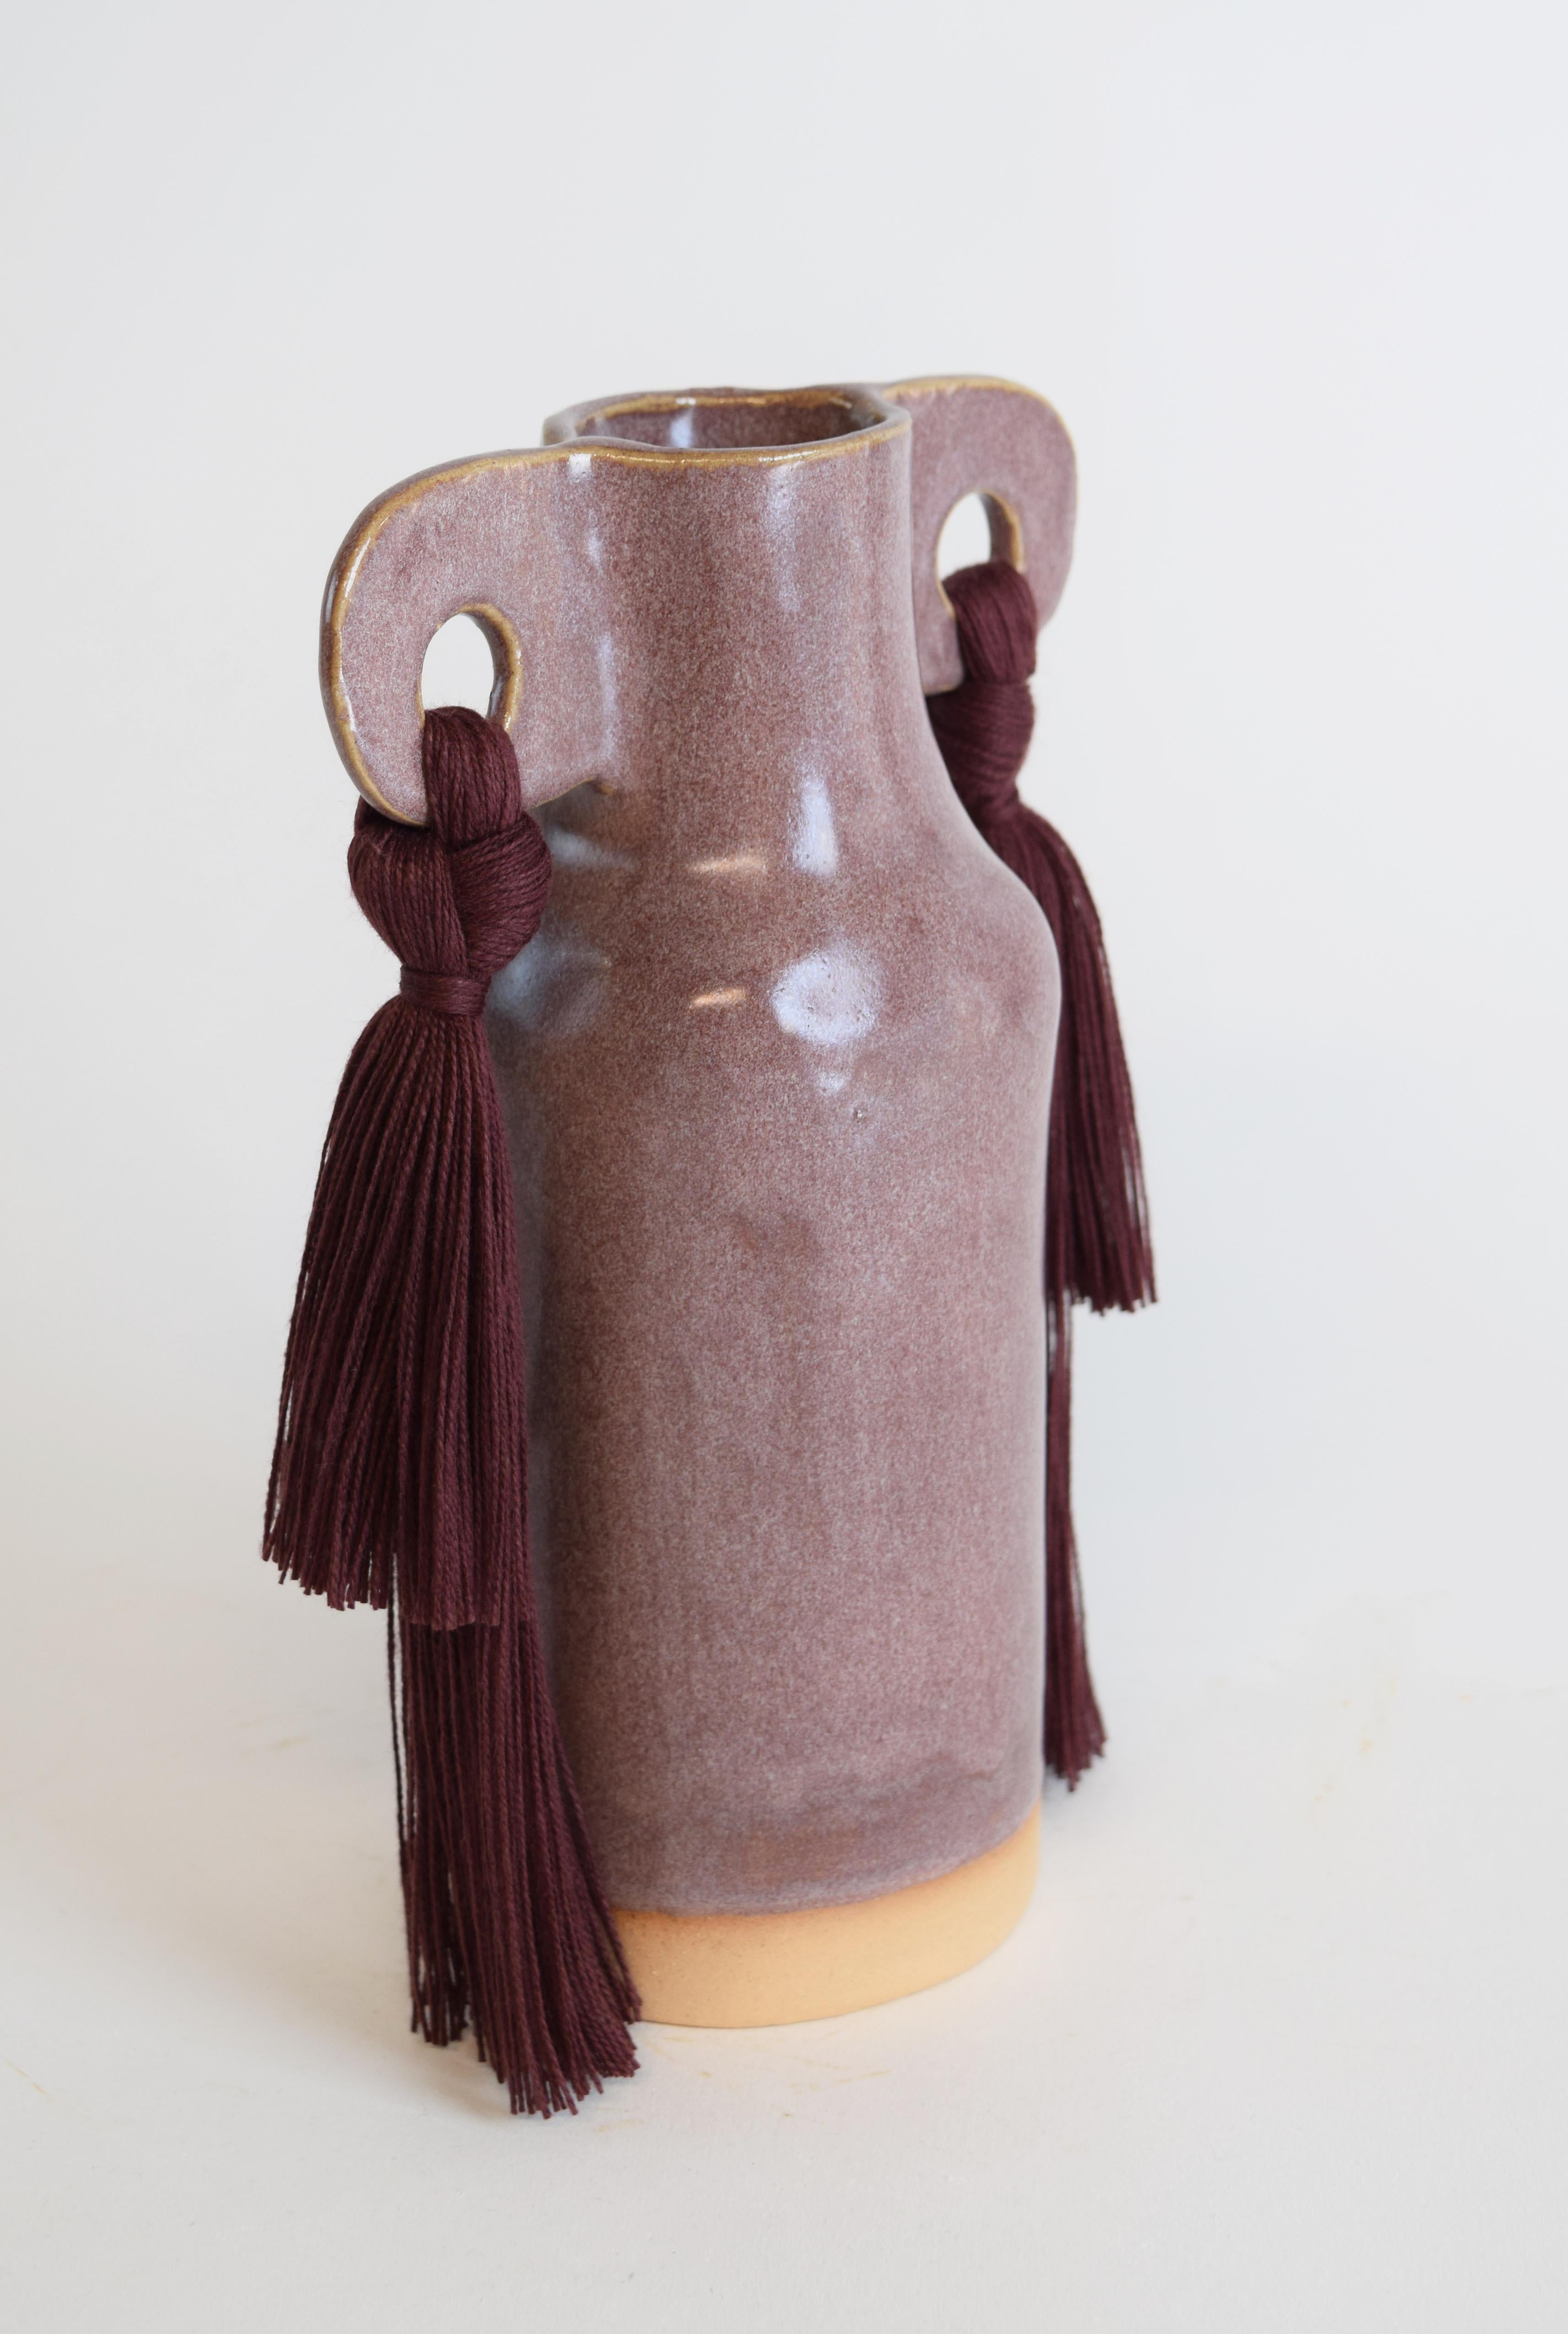 Vase #606 by Karen Gayle Tinney

A petite vase perfectly sized to stand alone in a small space or act as a companion to a larger piece. Each vase is formed by hand, making every piece unique.

Stoneware with light burgundy glaze. Burgundy cotton